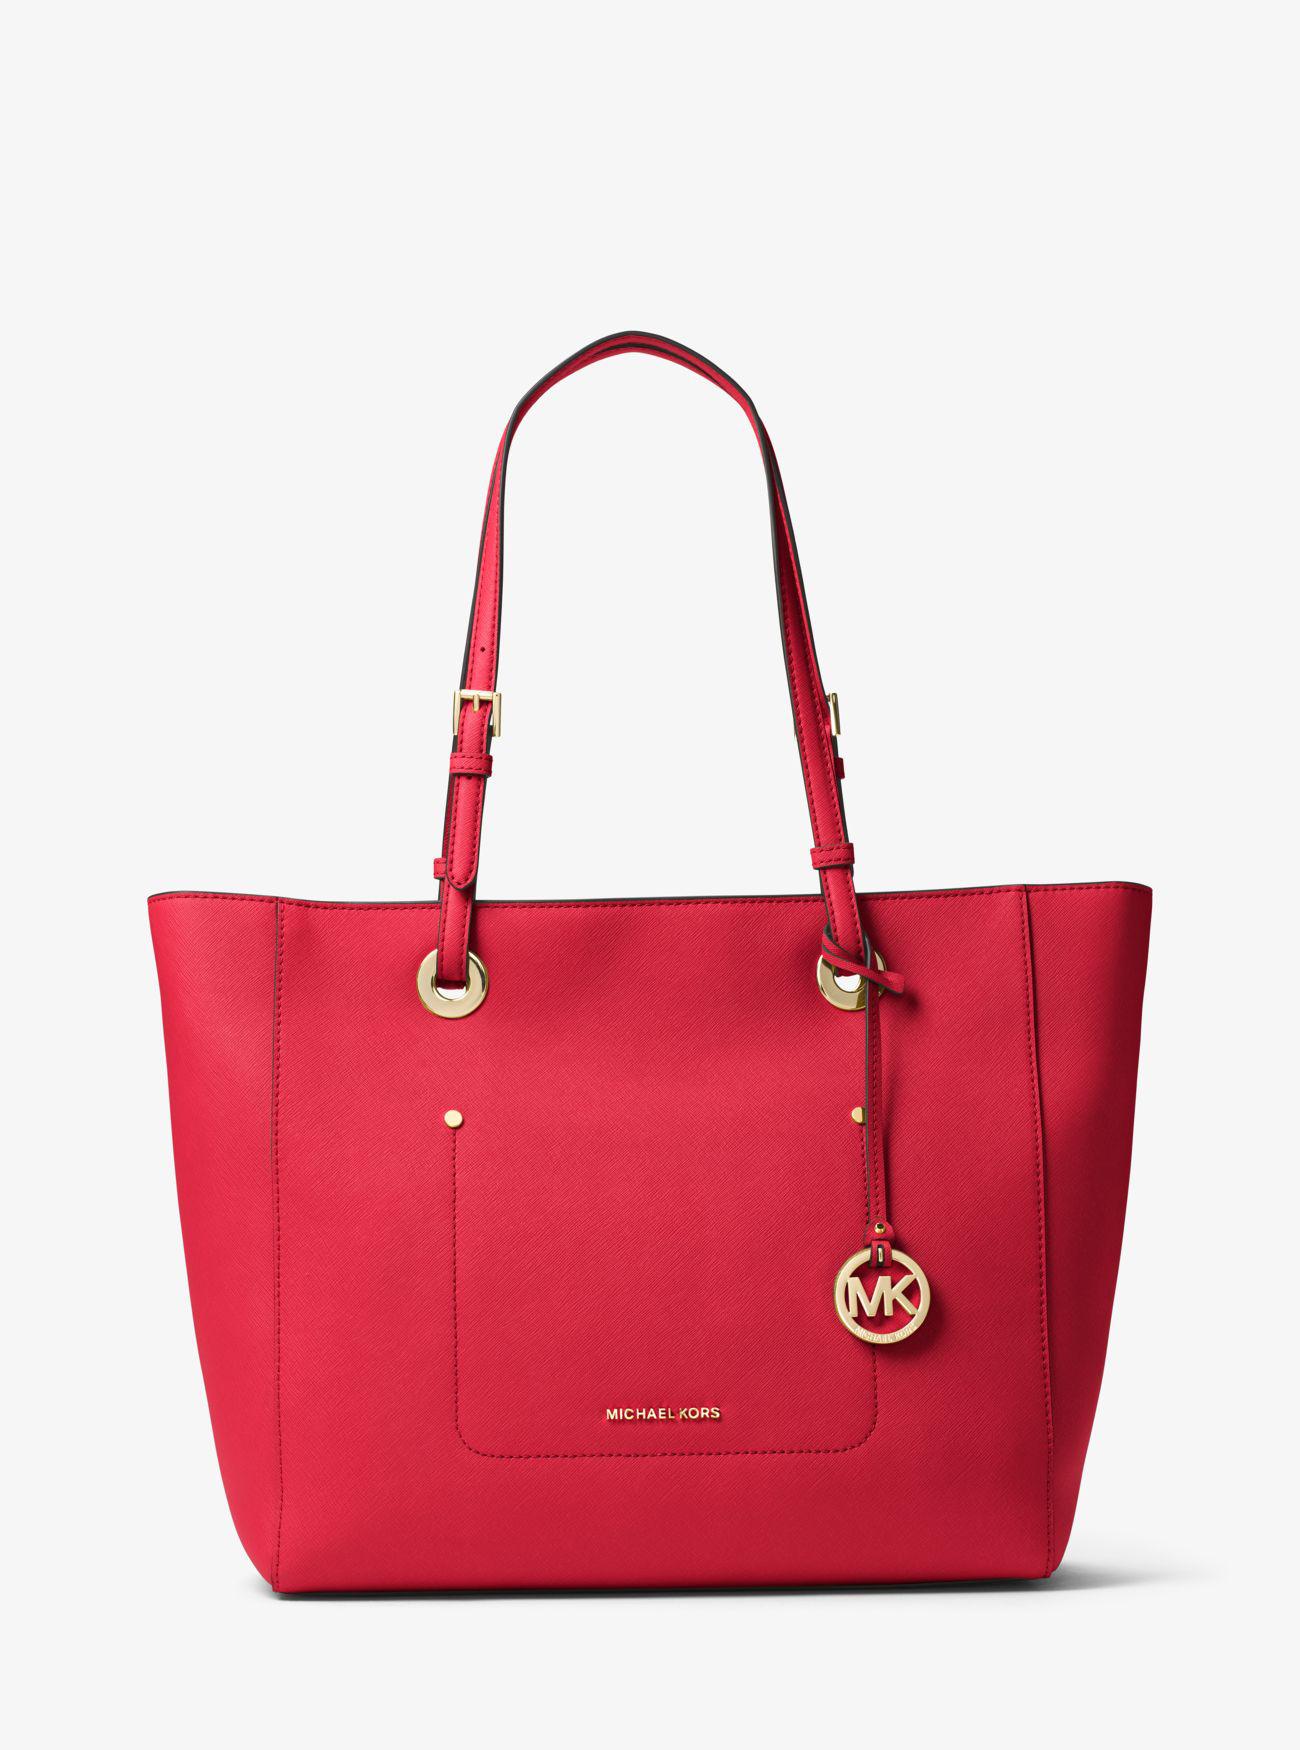 Michael Kors Walsh Large Saffiano Leather Tote Bag in Red - Lyst